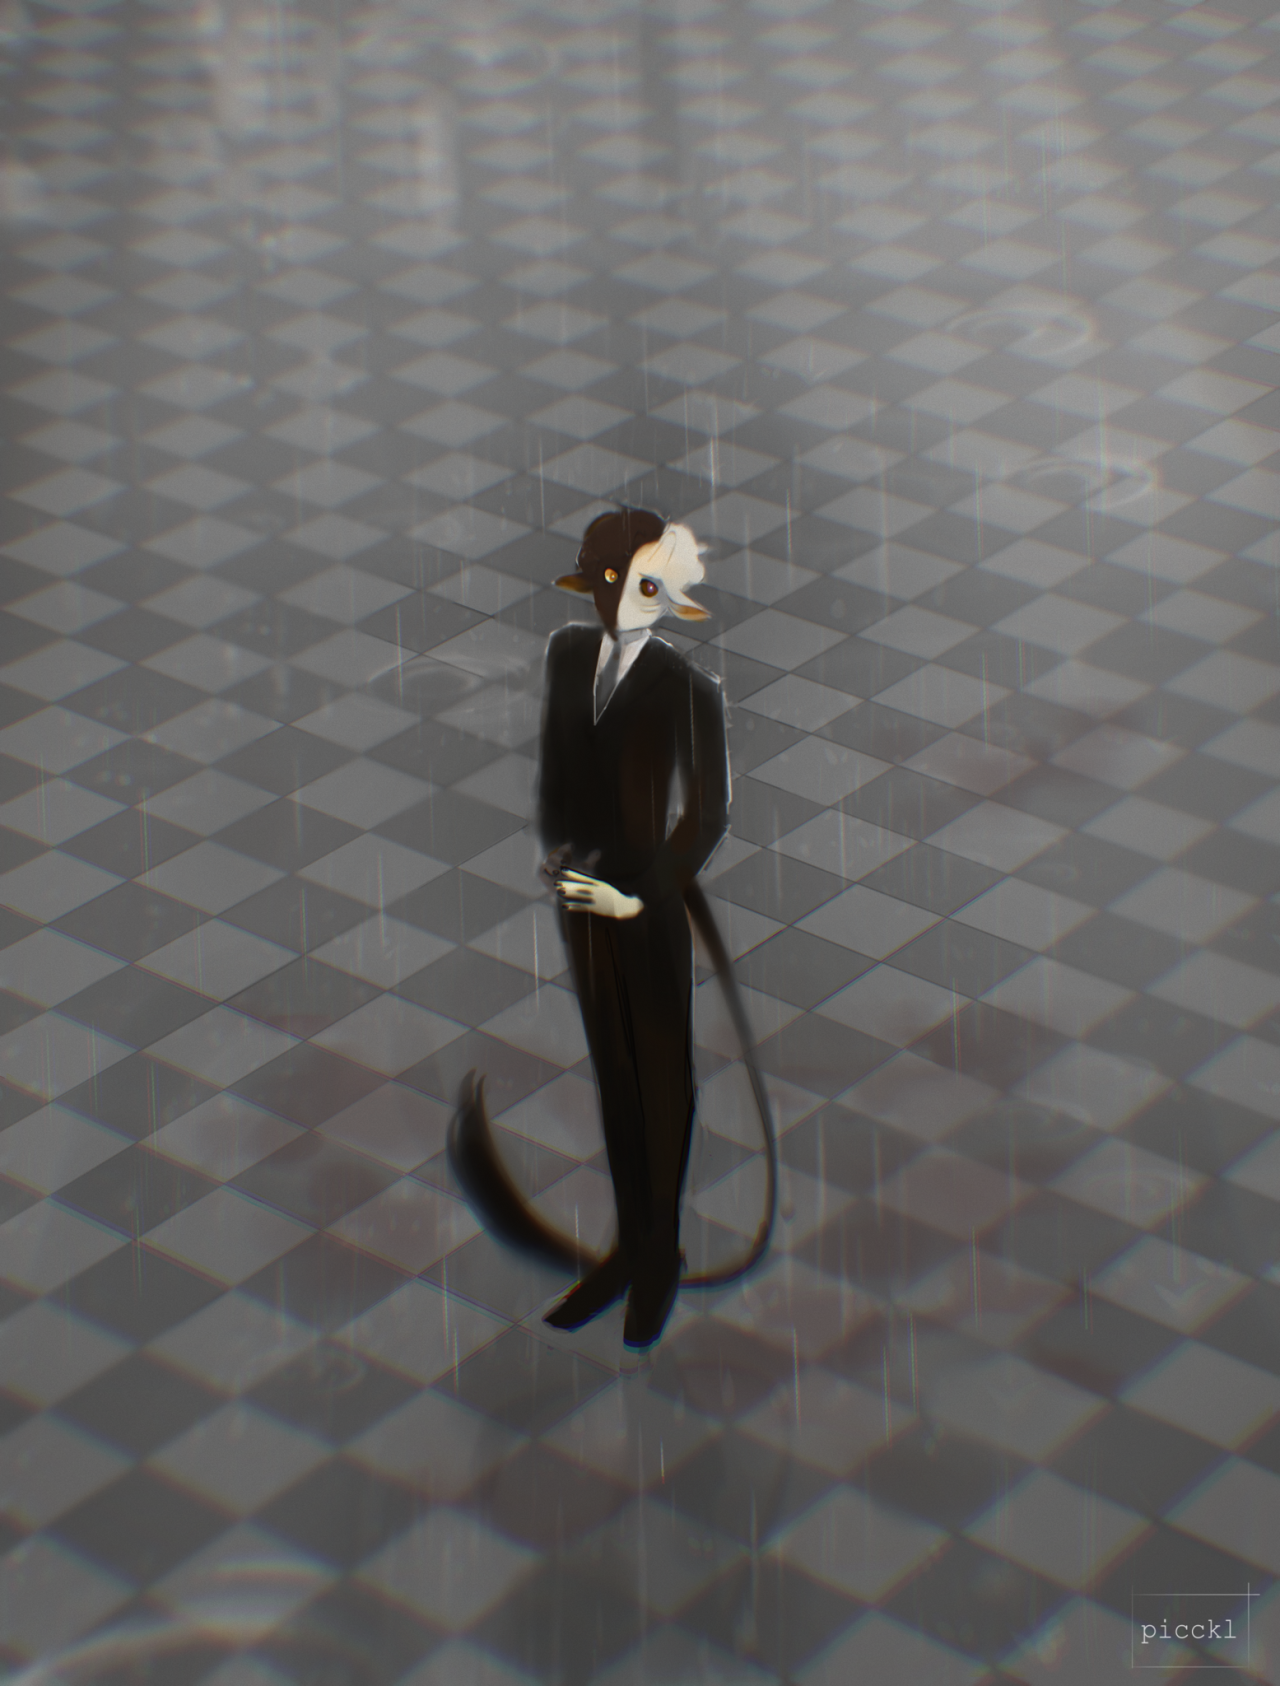 This is a drawing of Ranboo standing on a grey checkered floor in the rain rendered as more of a creature than human. He has shaggier hair that still fits the black and white scheme. He has long ears like a sheep on the sides of his head. He wears the same suit as his minecraft skin but with a dark green tie. He has a long black tail that ends in a black tuft of hair. He has horns that blend in with his hair, two grey lines under his red eye, and no visible mouth. The drawing looks like it has a rainy filter on it, making Ranboo appear slightly blurry in the rain.